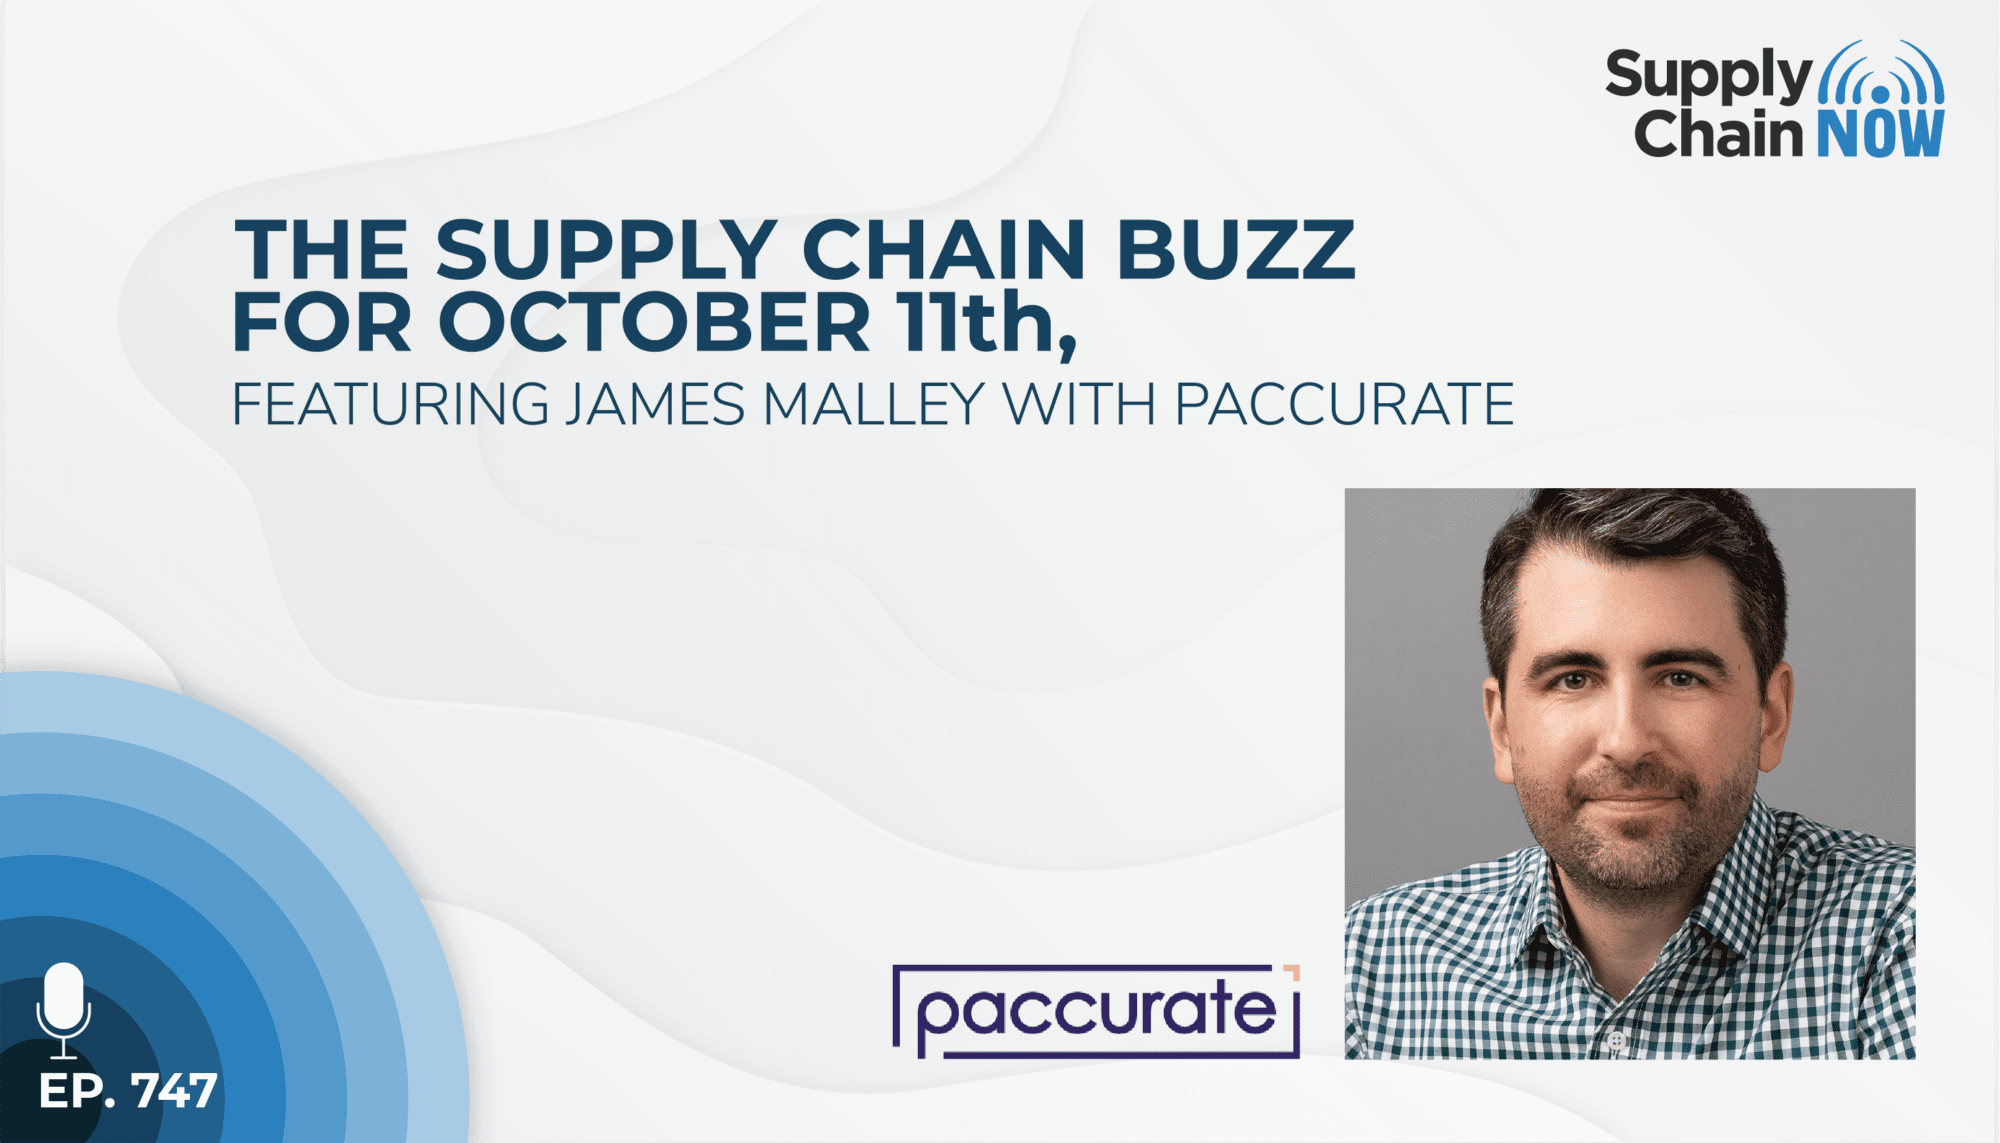 James Malley with Paccurate on The Supply Chain Buzz